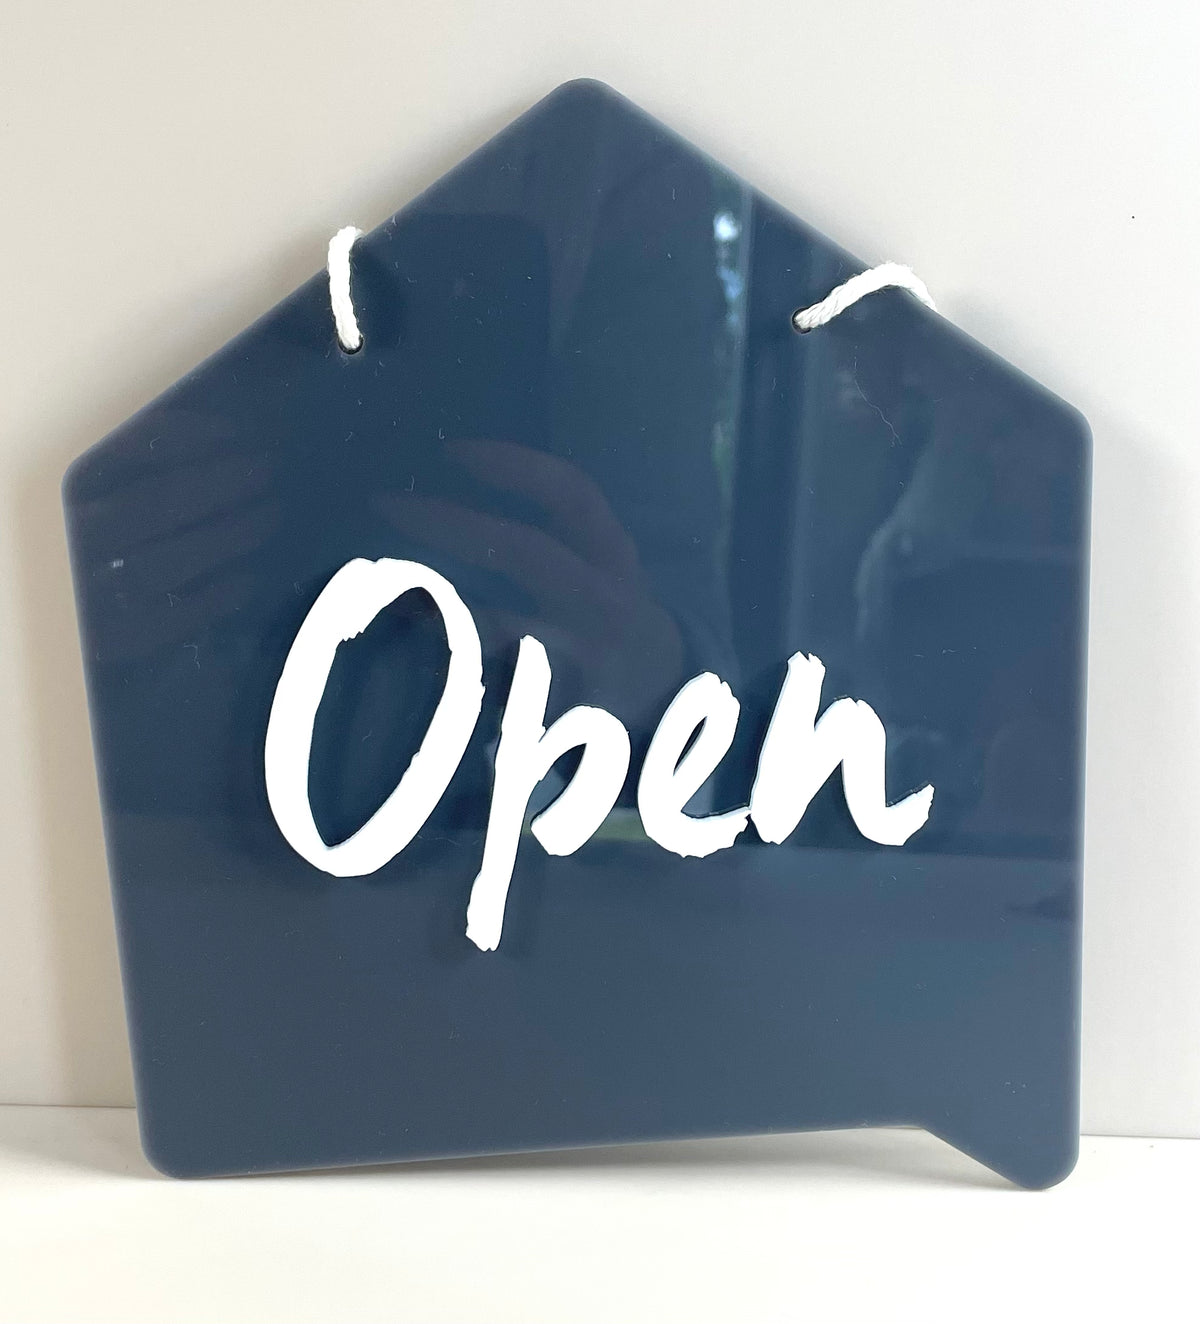 Small open/closed sign